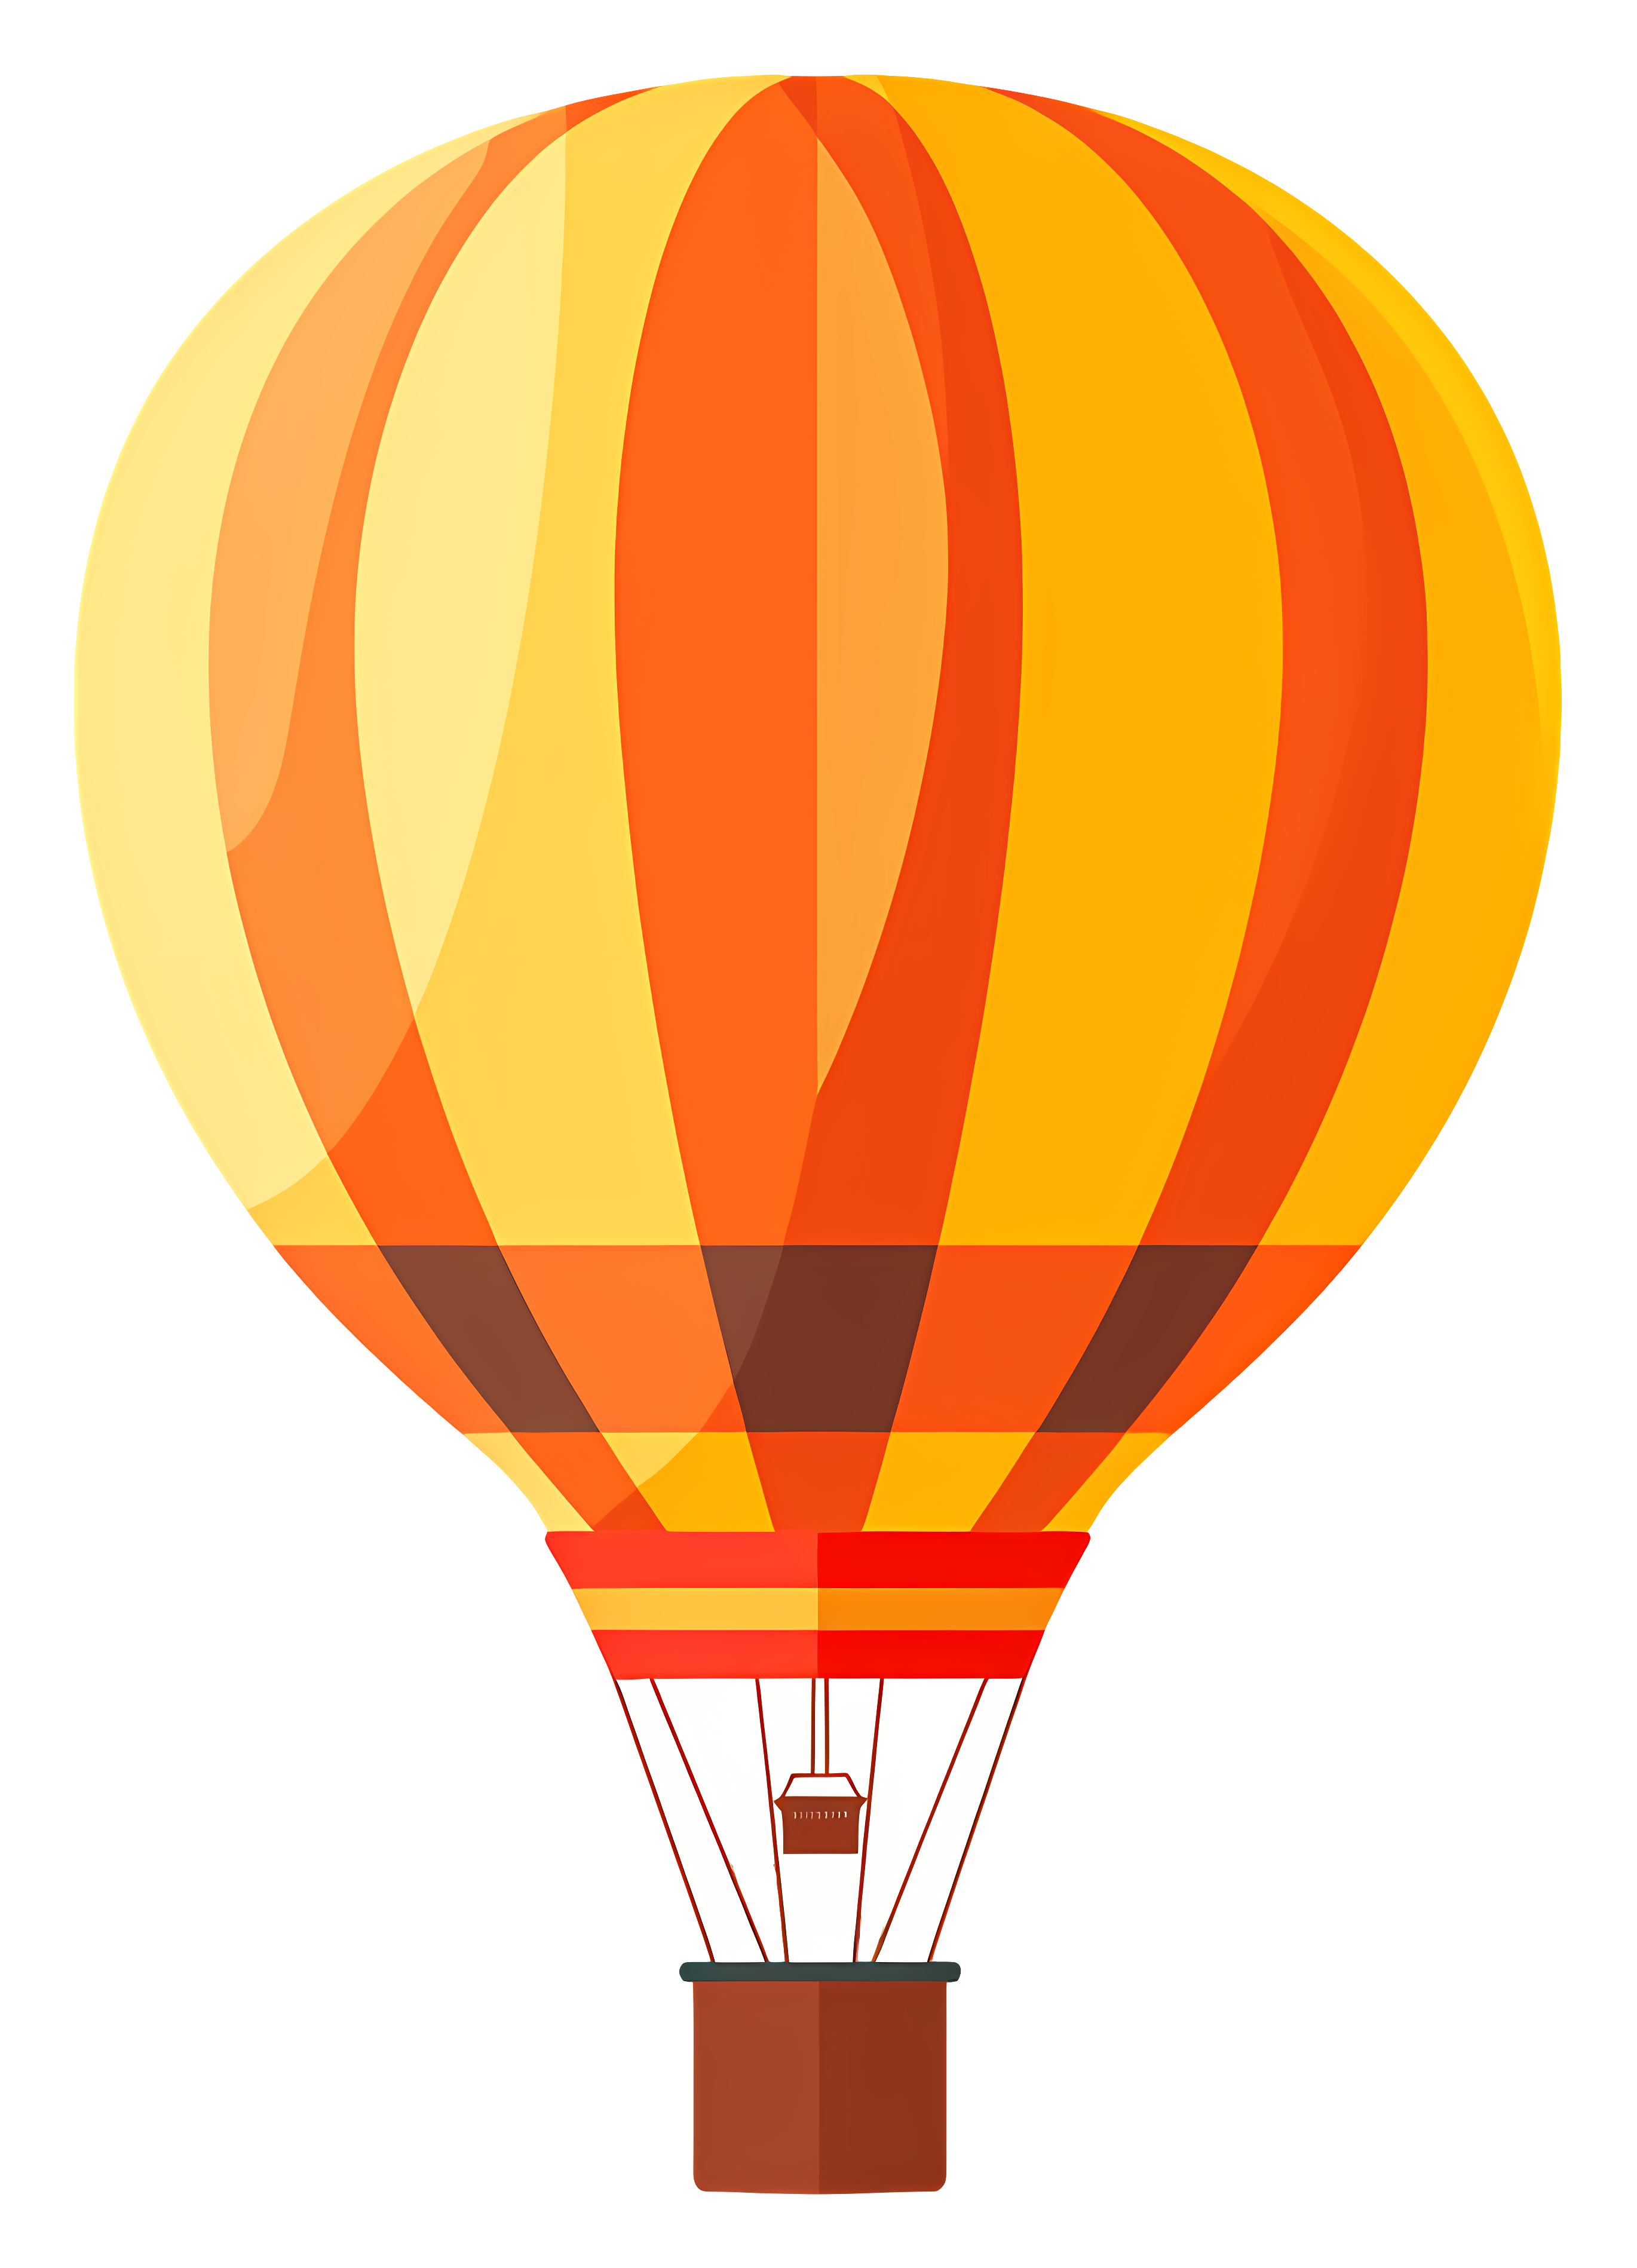 Yellow hot air balloon floating in sky Clipart